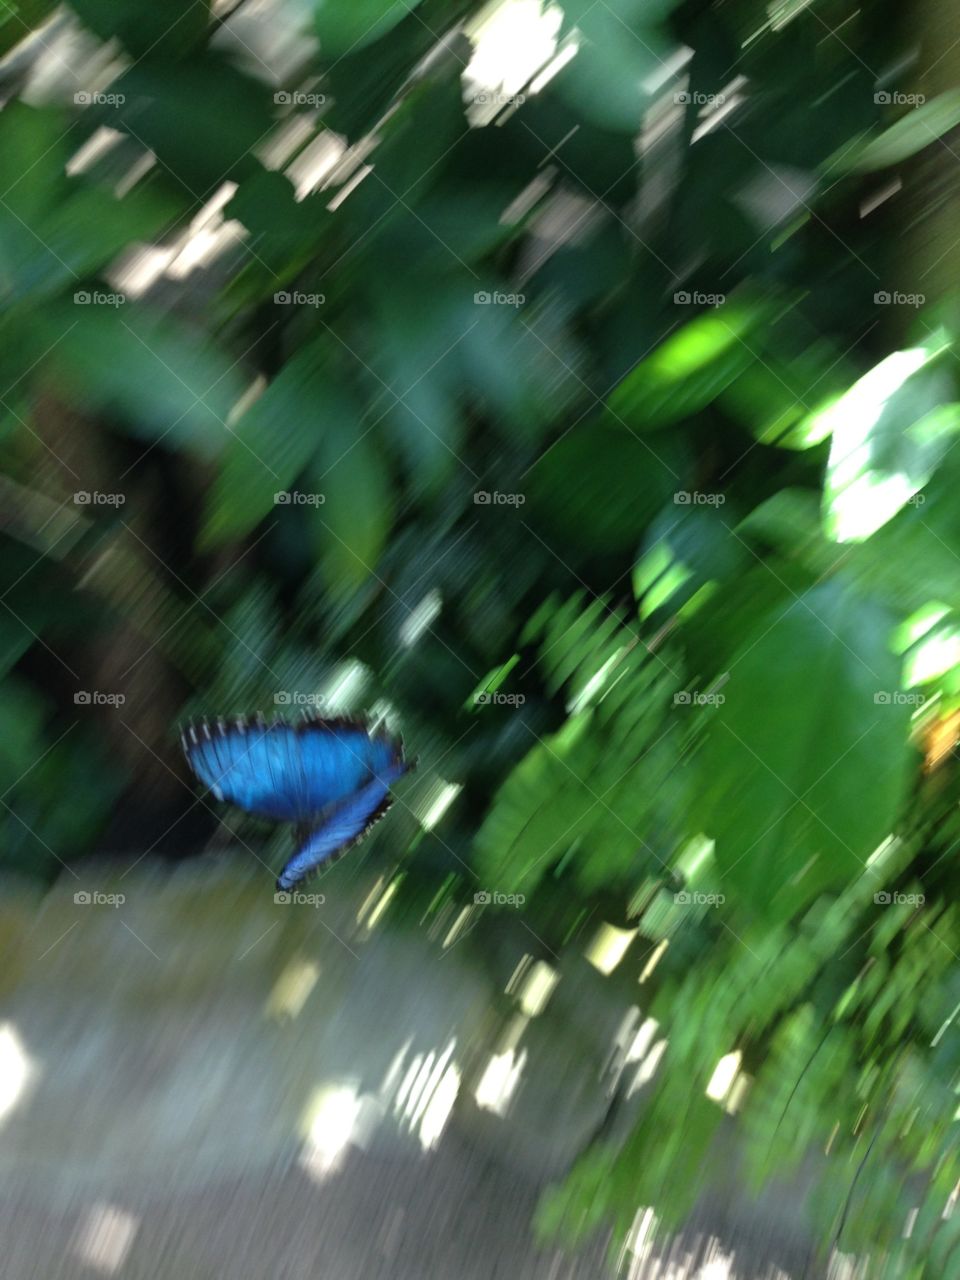 The elusive blue butterfly